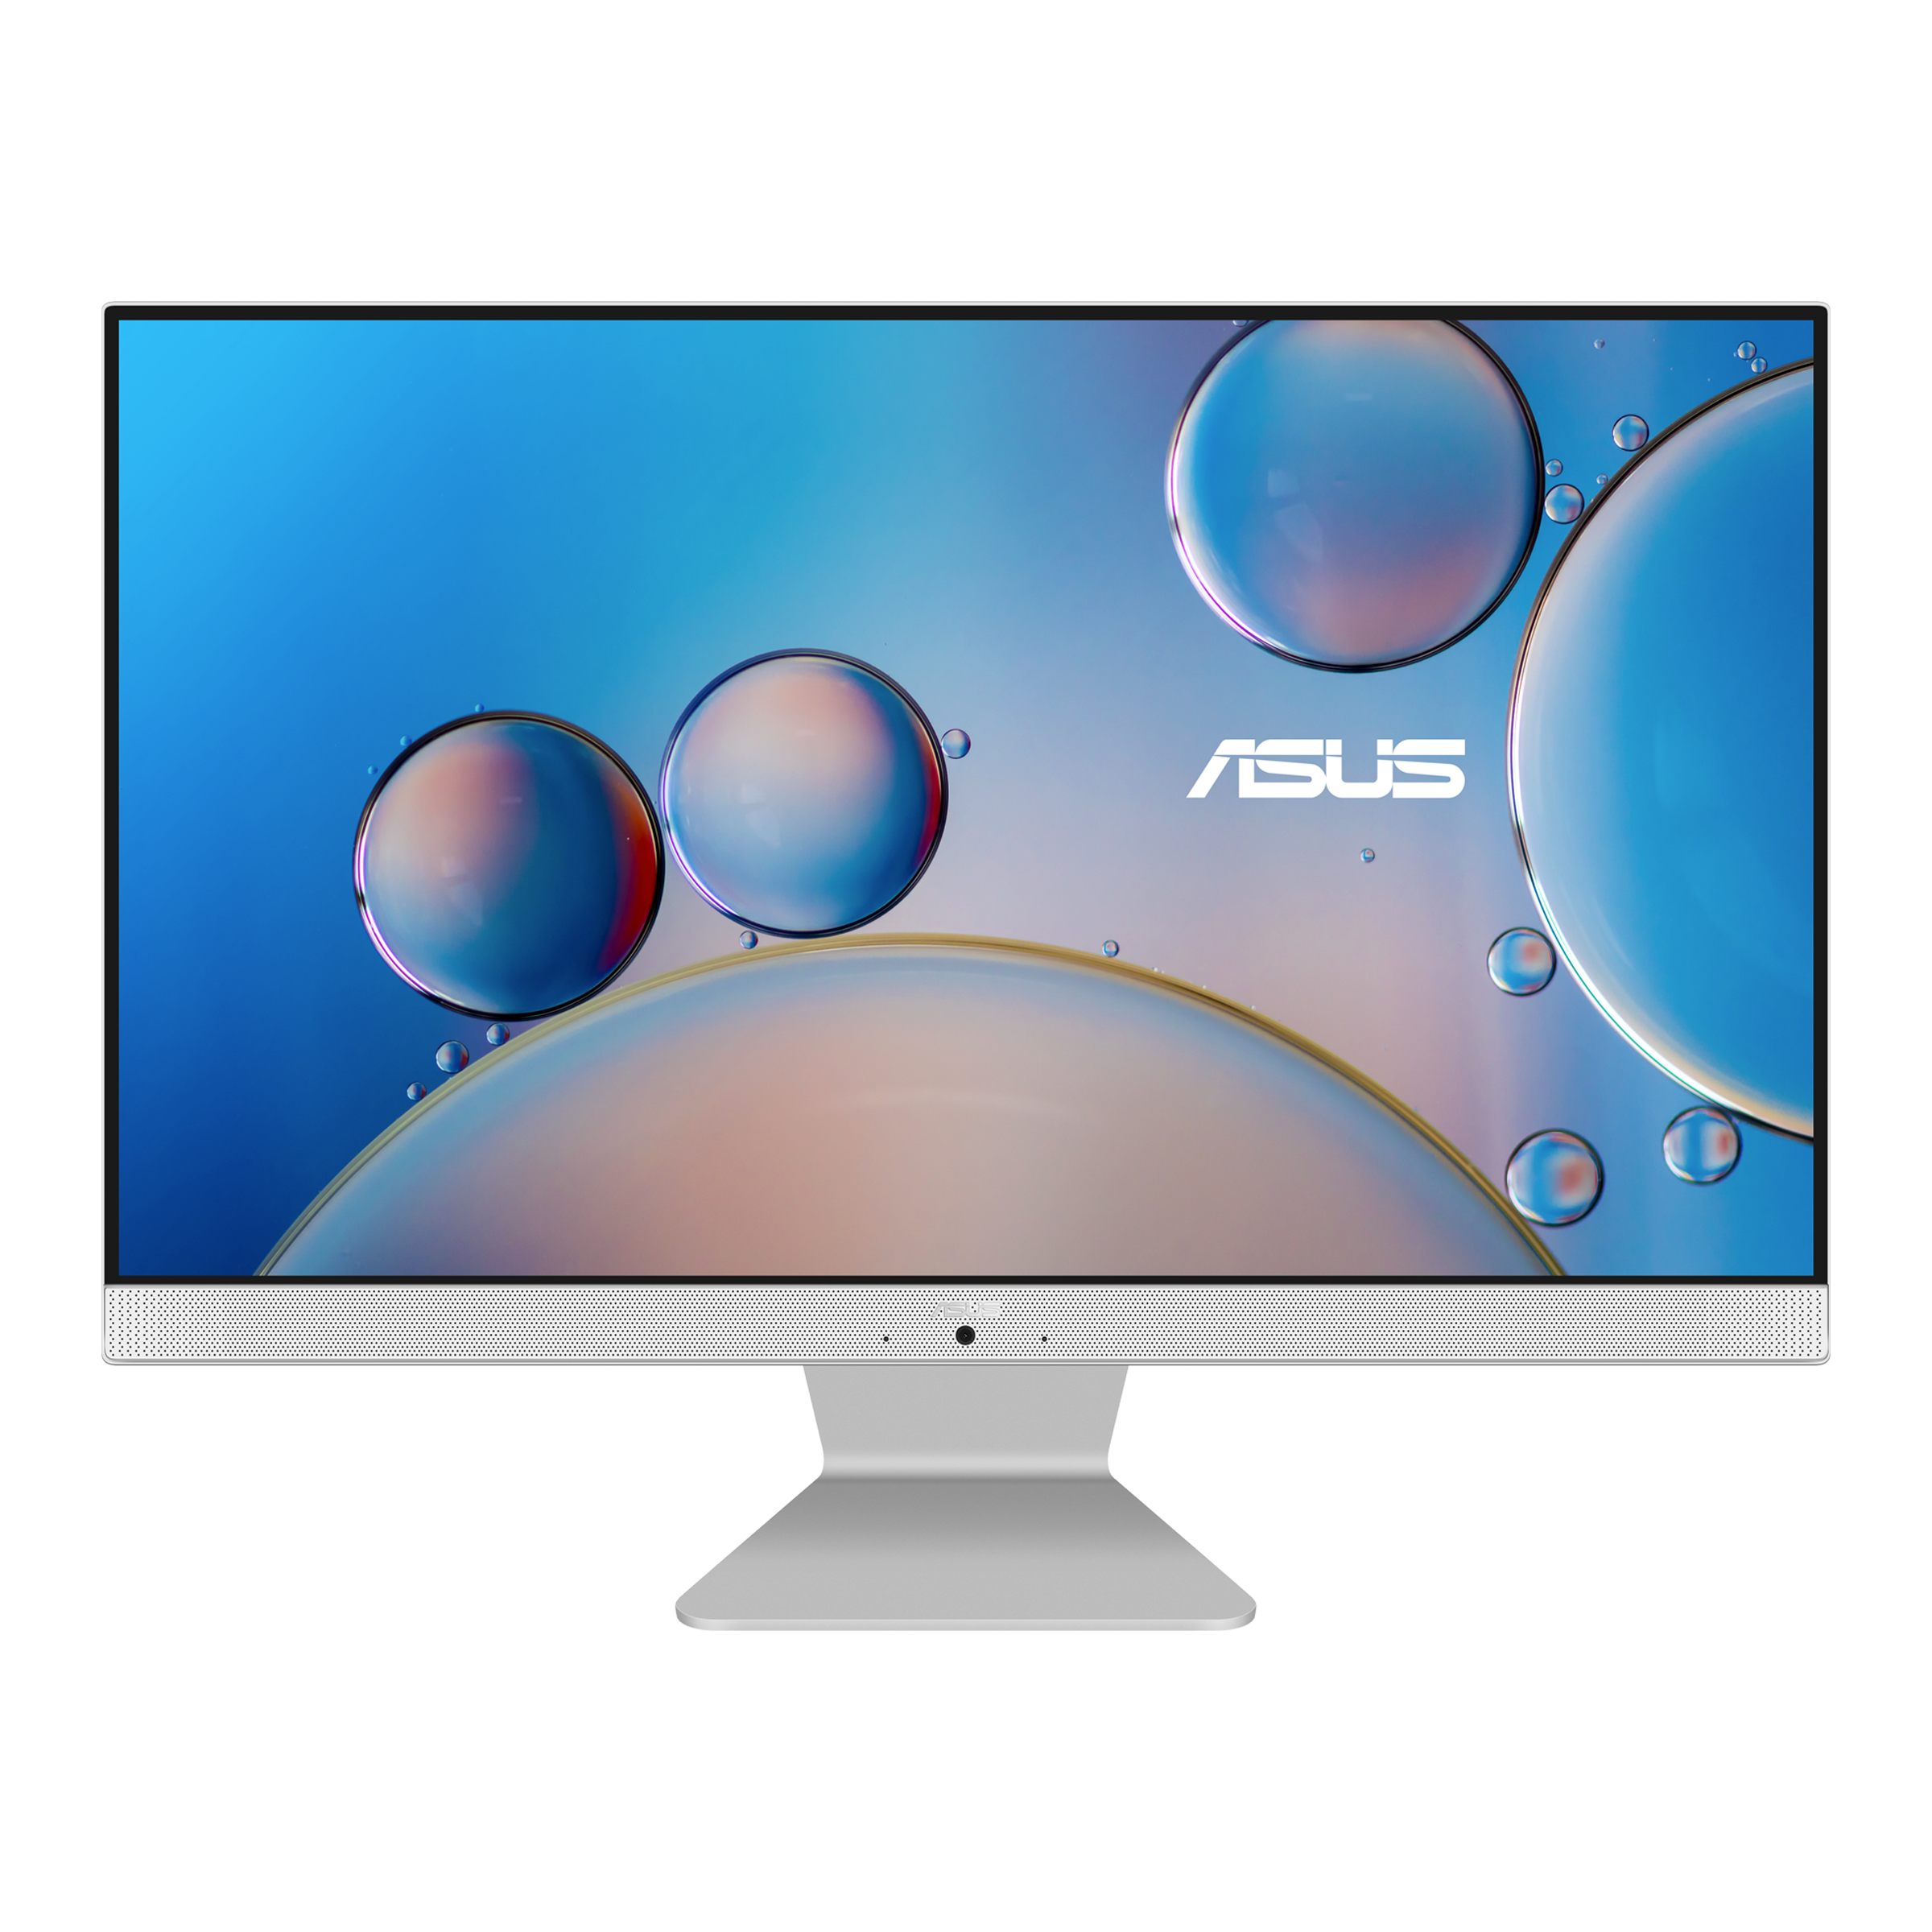 ASUS M3400｜All-in-One PCs｜ASUS Malaysia